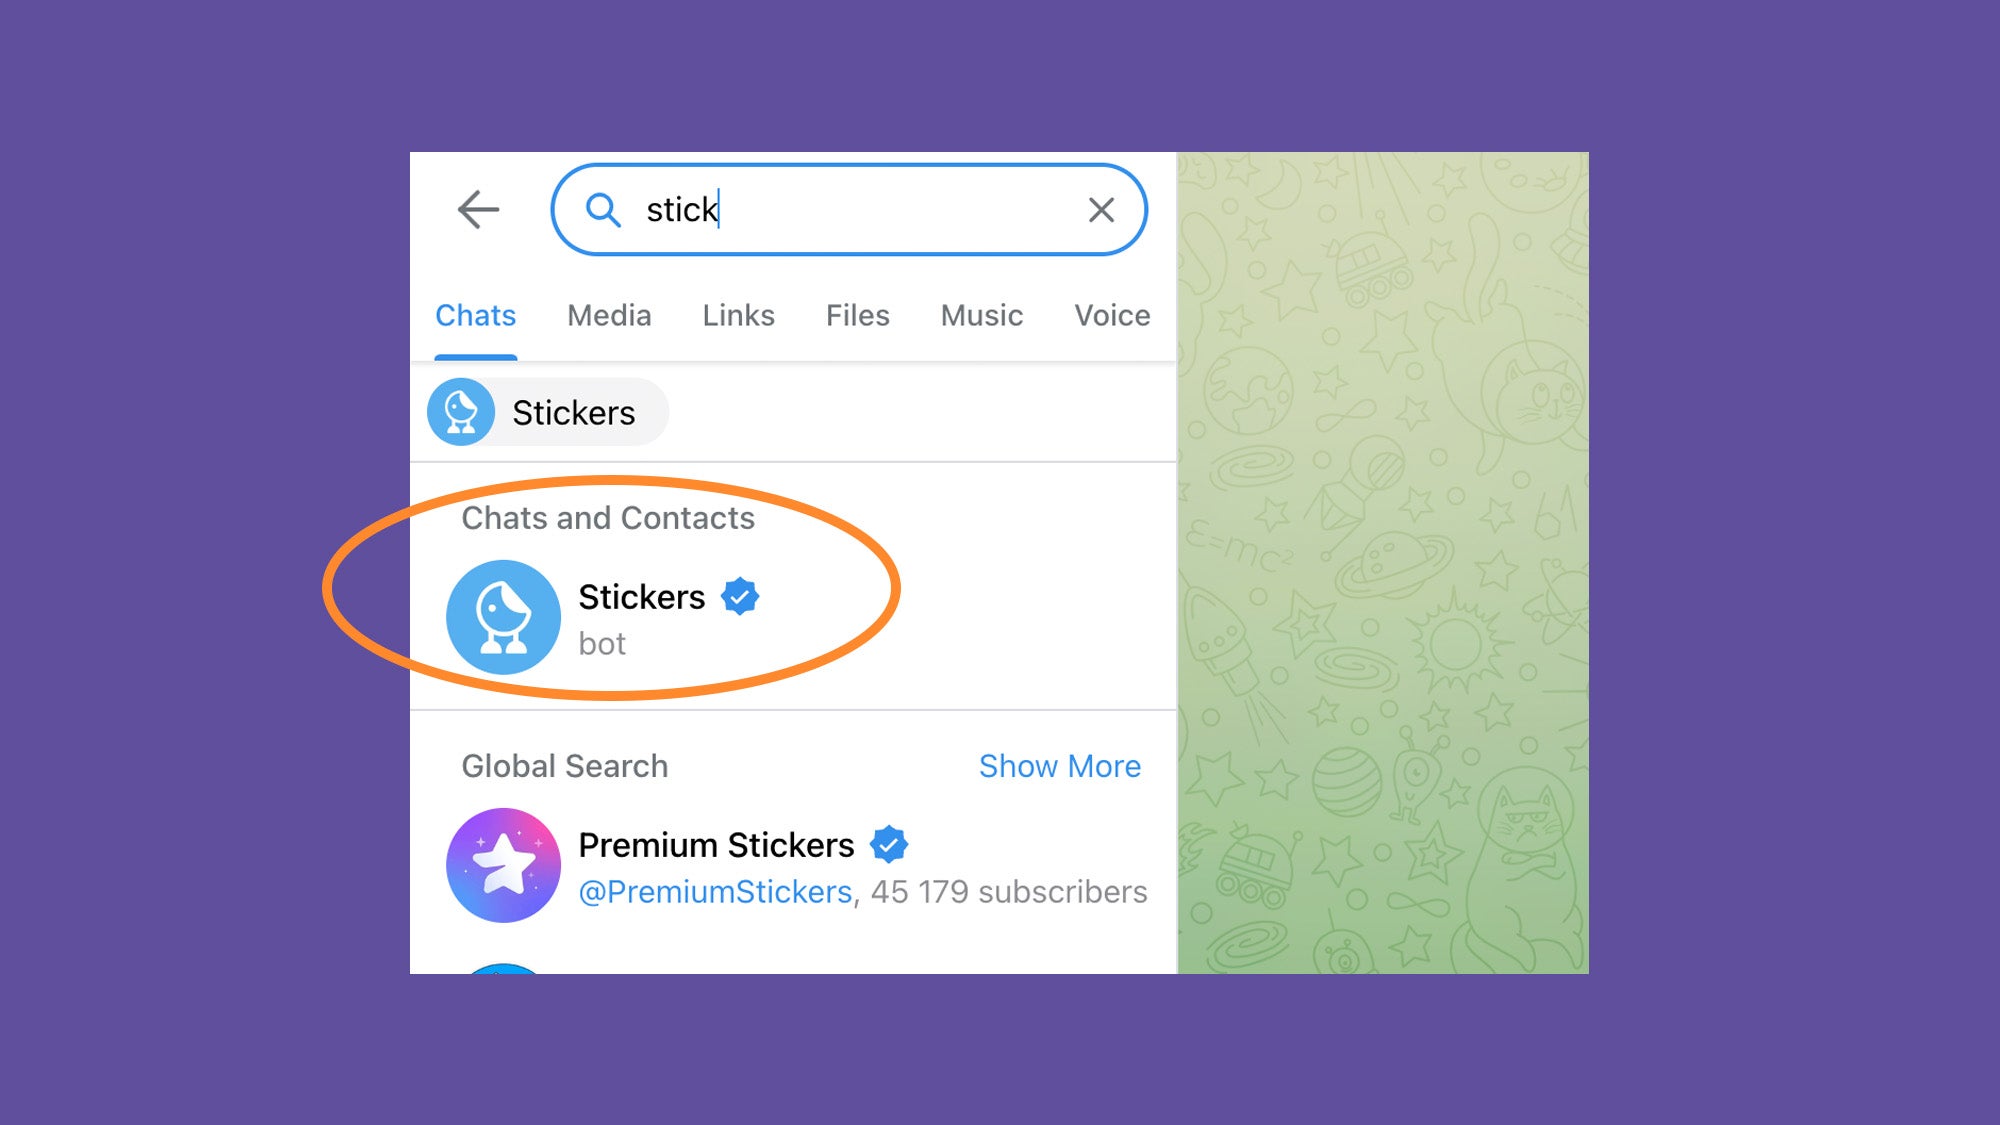 Android search results showing Telegram's Sticker bot